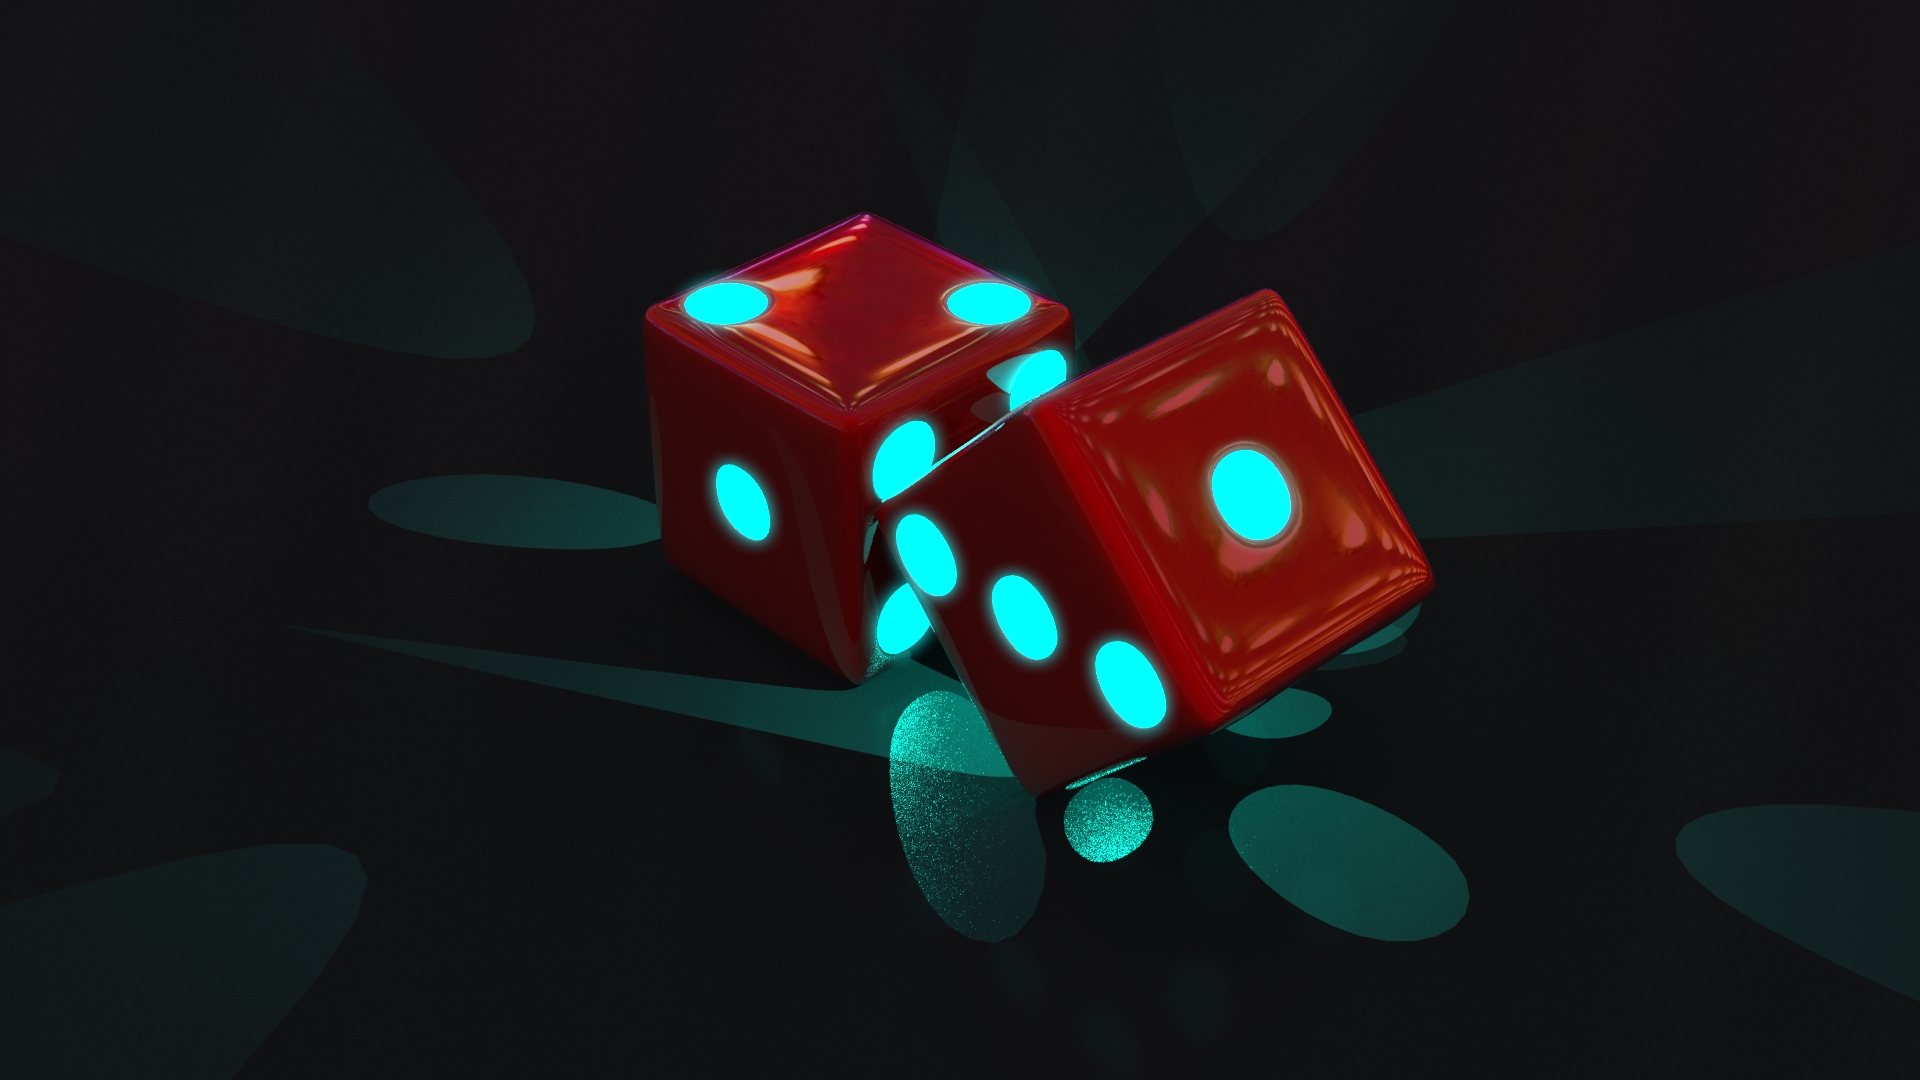 dice wallpaper,games,dice,green,dice game,indoor games and sports